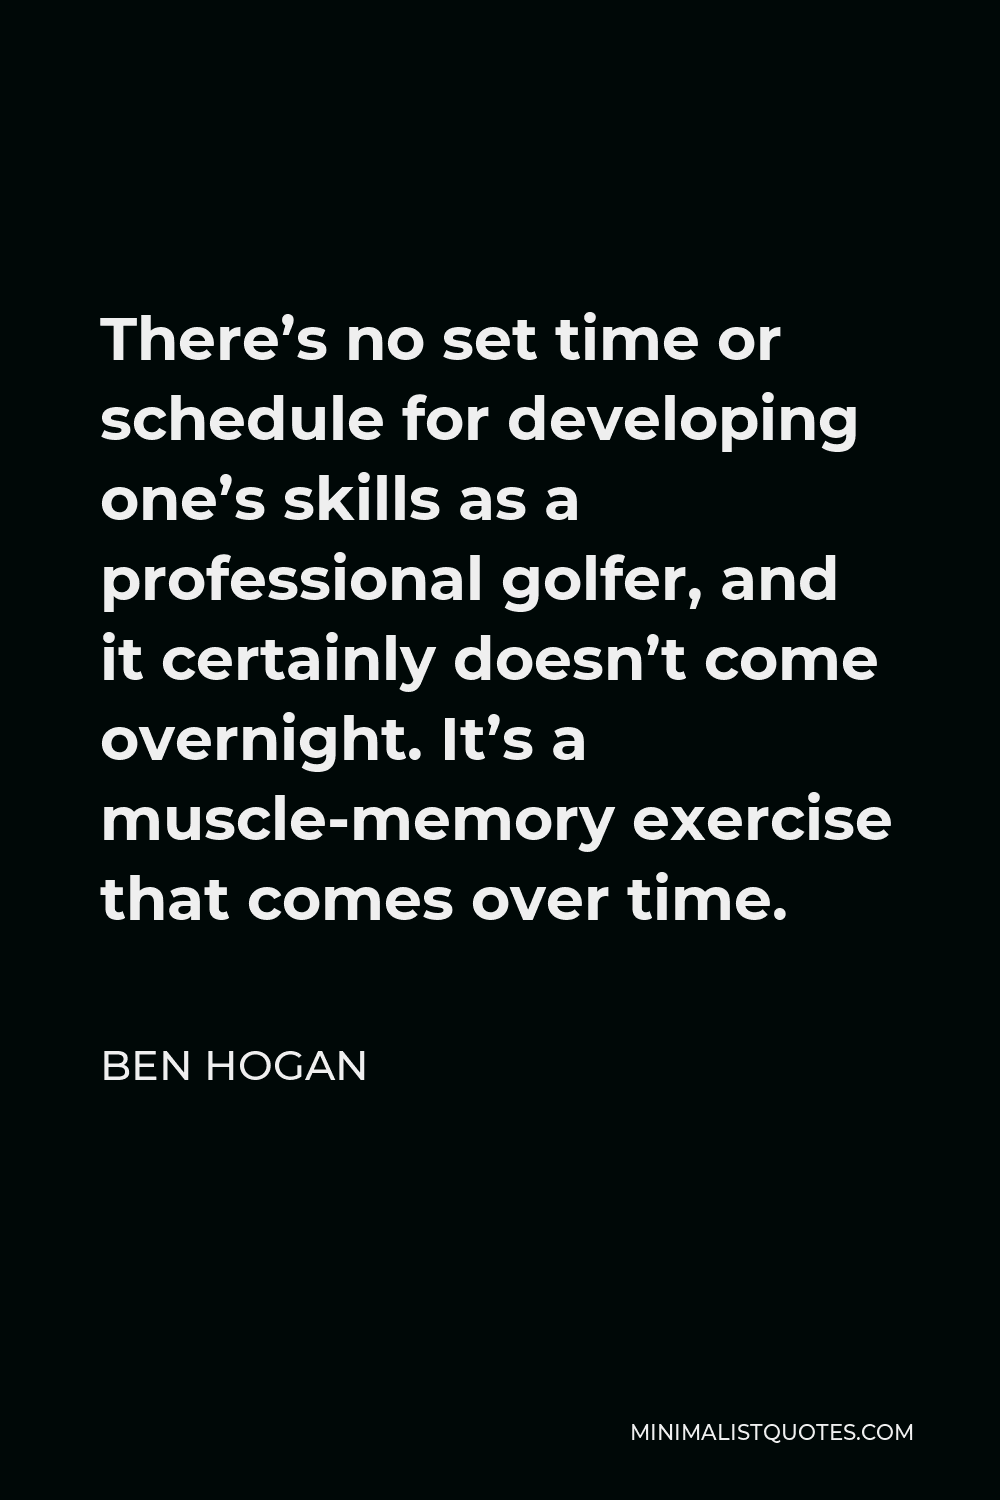 Ben Hogan Quote - There’s no set time or schedule for developing one’s skills as a professional golfer, and it certainly doesn’t come overnight. It’s a muscle-memory exercise that comes over time.